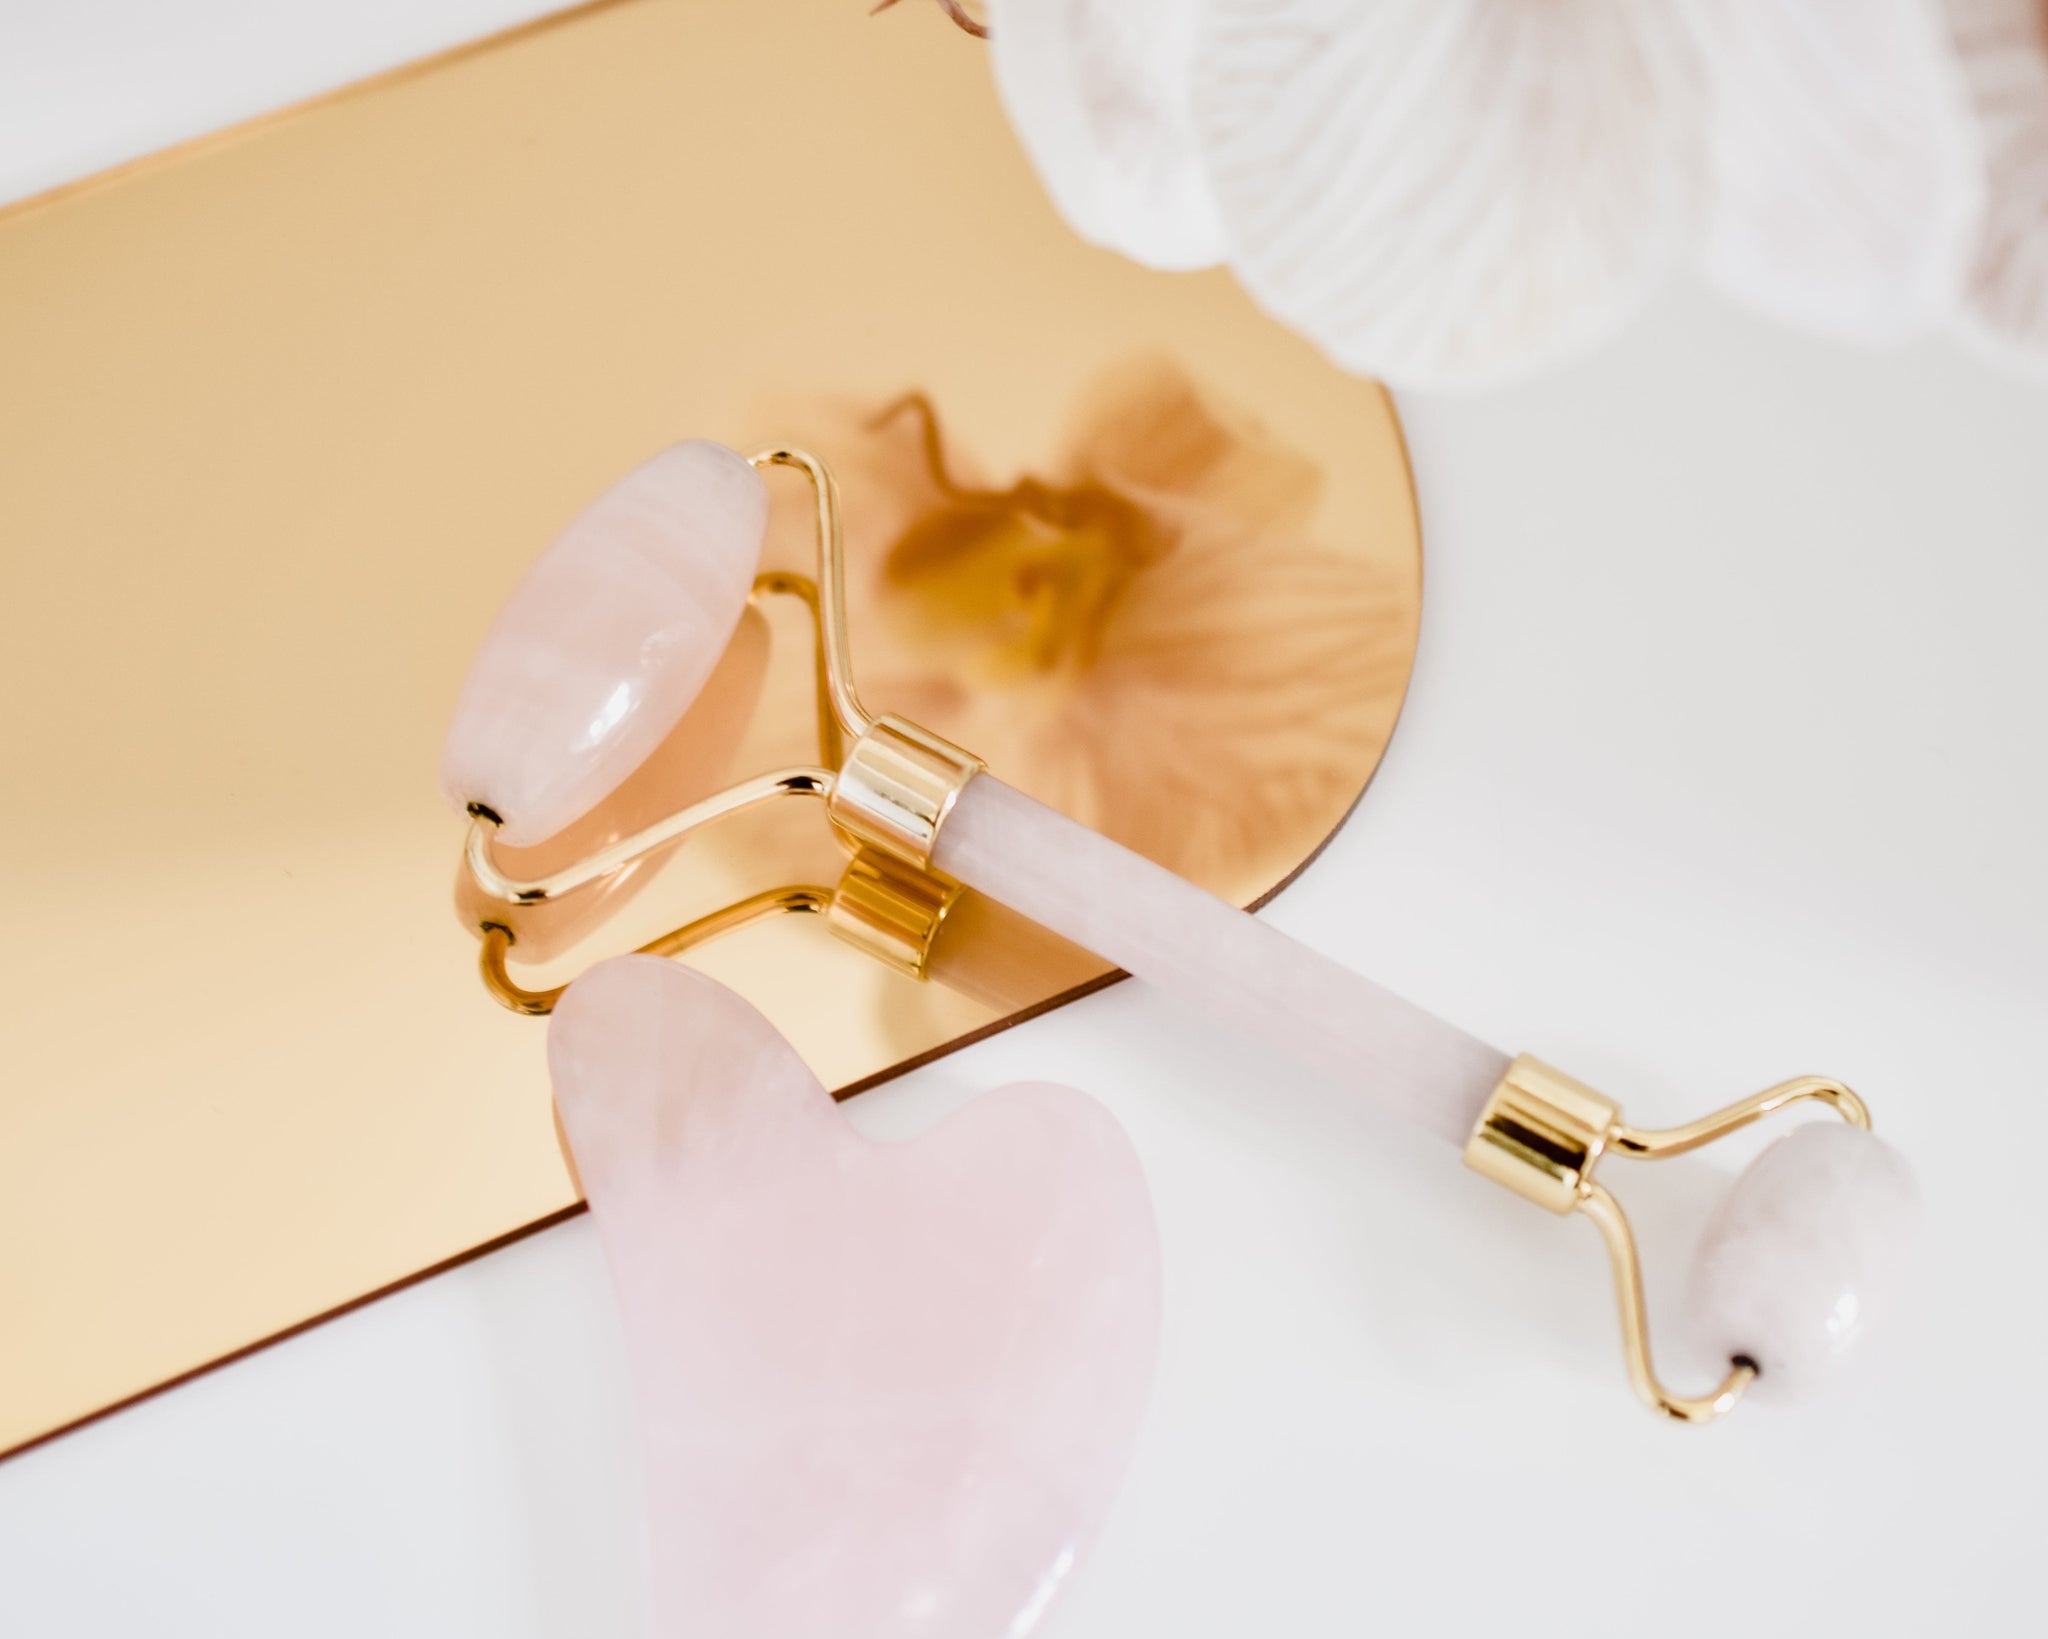 beauty tools on rose gold mirror arch prop - backdrop collective